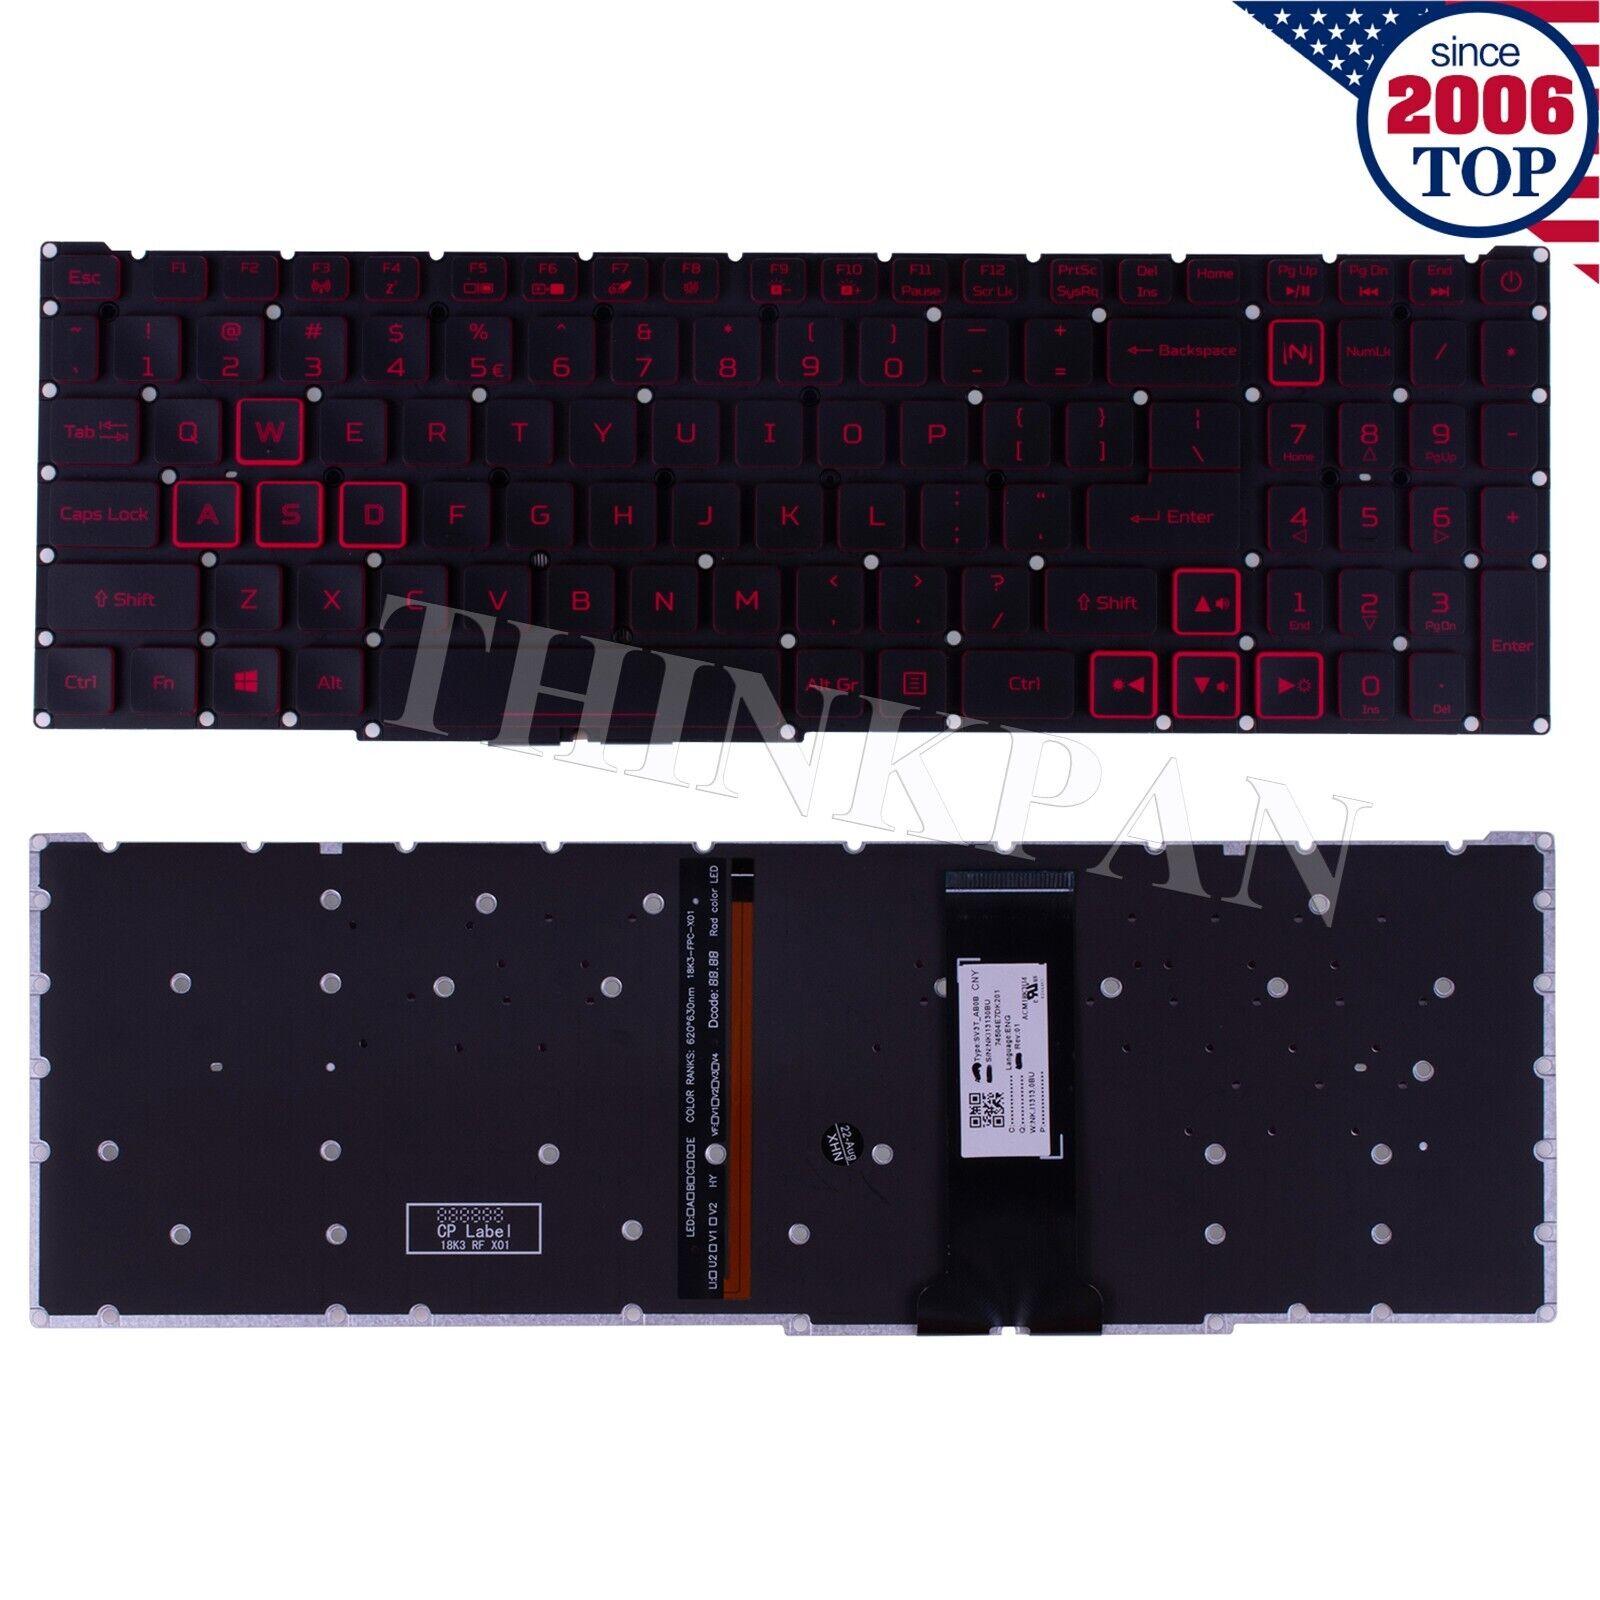 Genuine Backlit US Keyboard for Acer Nitro 5 AN515-54 AN517-51 AN715-51 N18C3